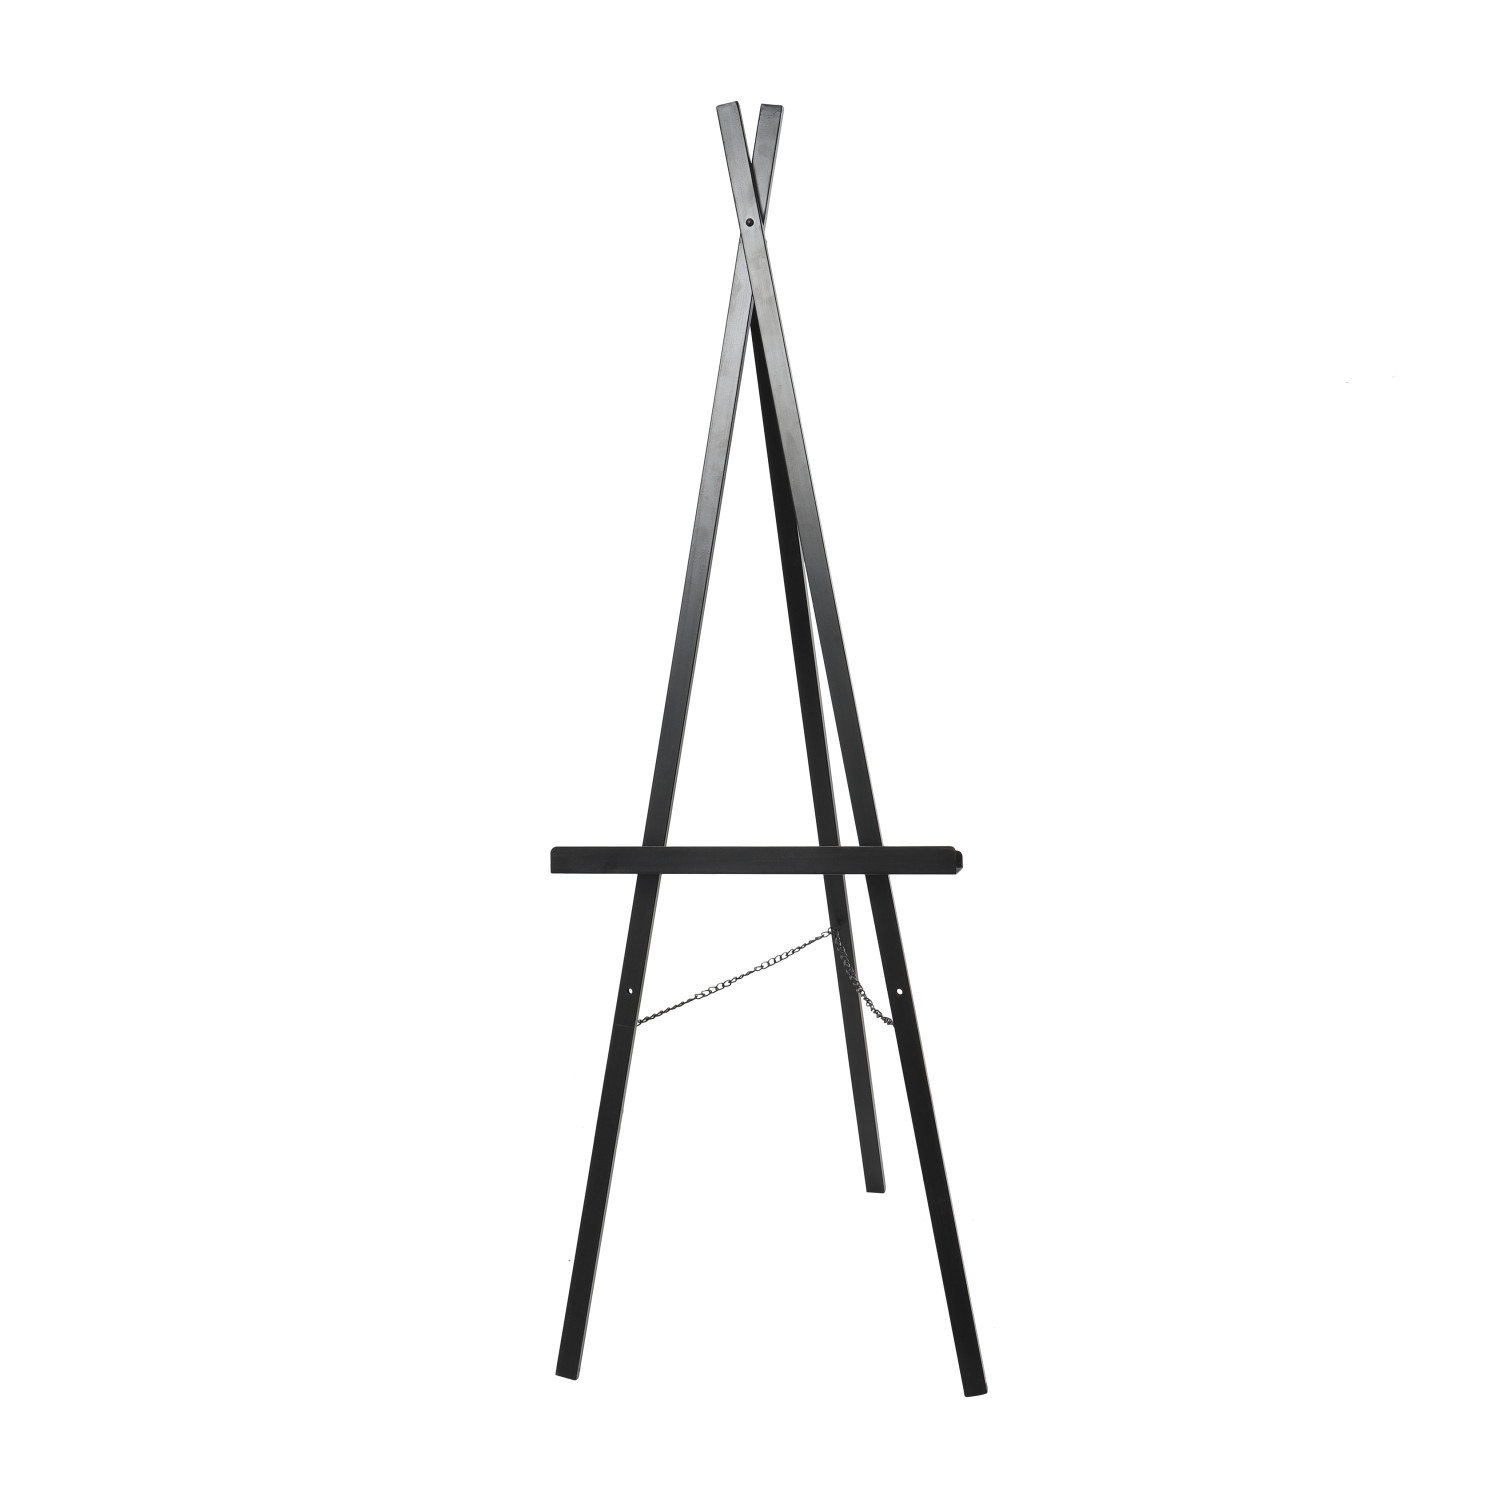 Easels: Adjustable Black Easel - 4 x 3 3/4 Inches